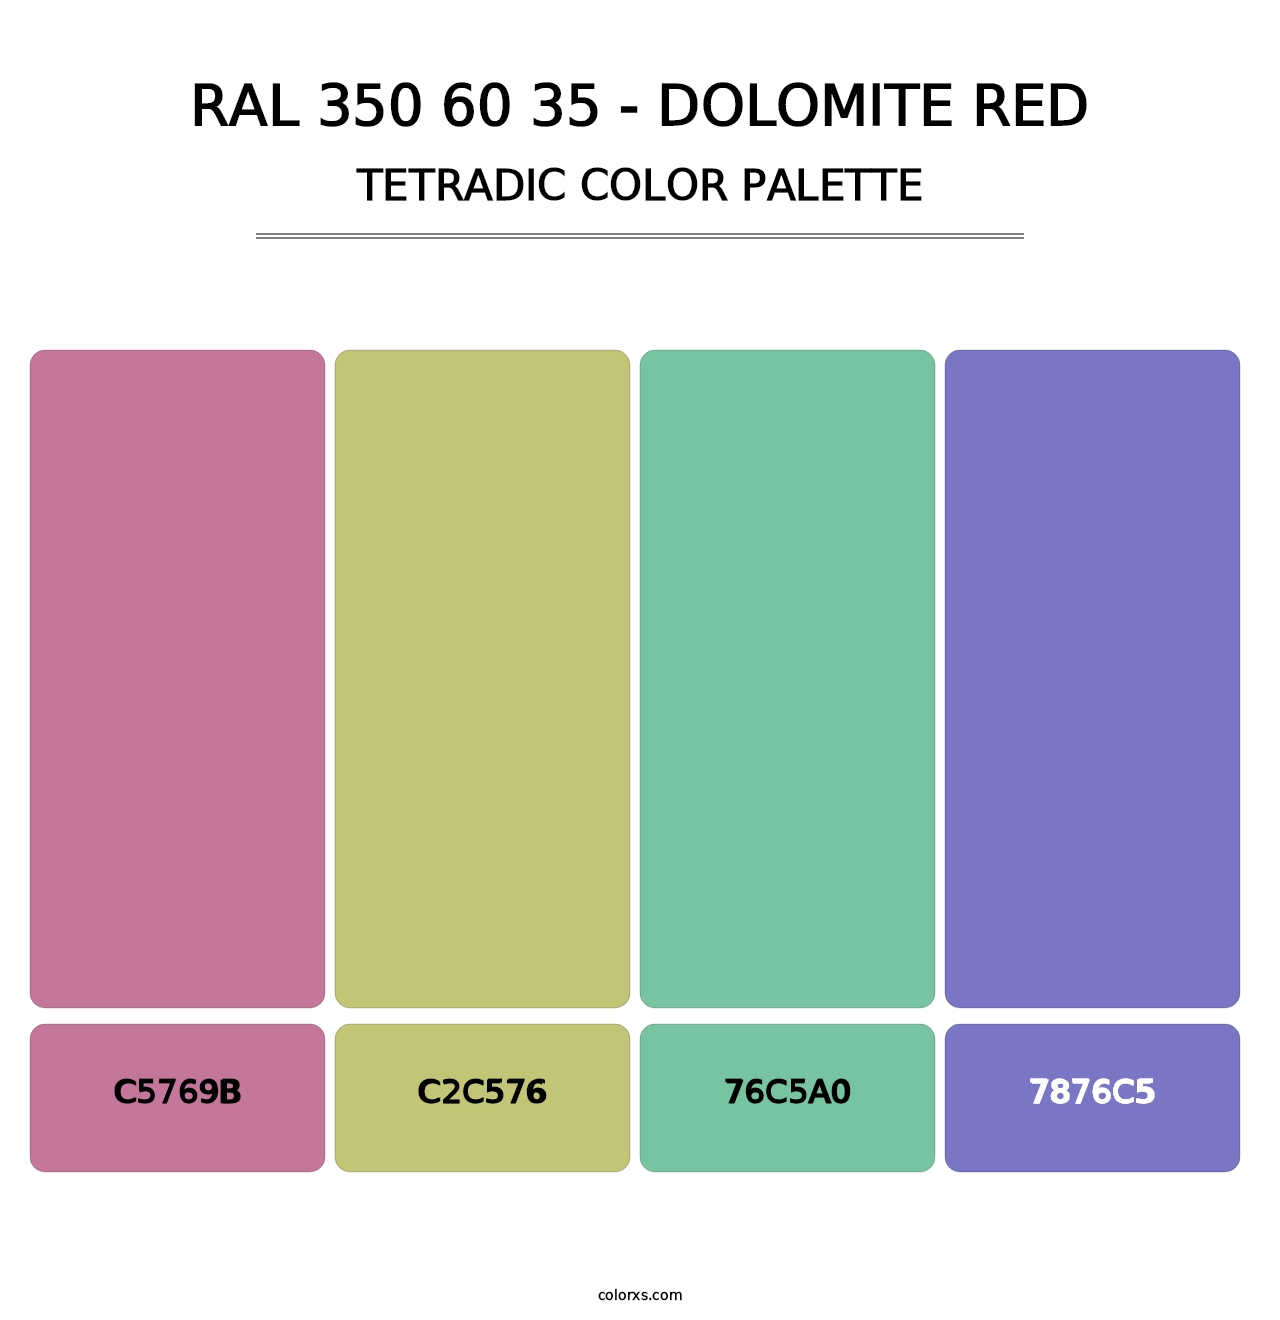 RAL 350 60 35 - Dolomite Red - Tetradic Color Palette